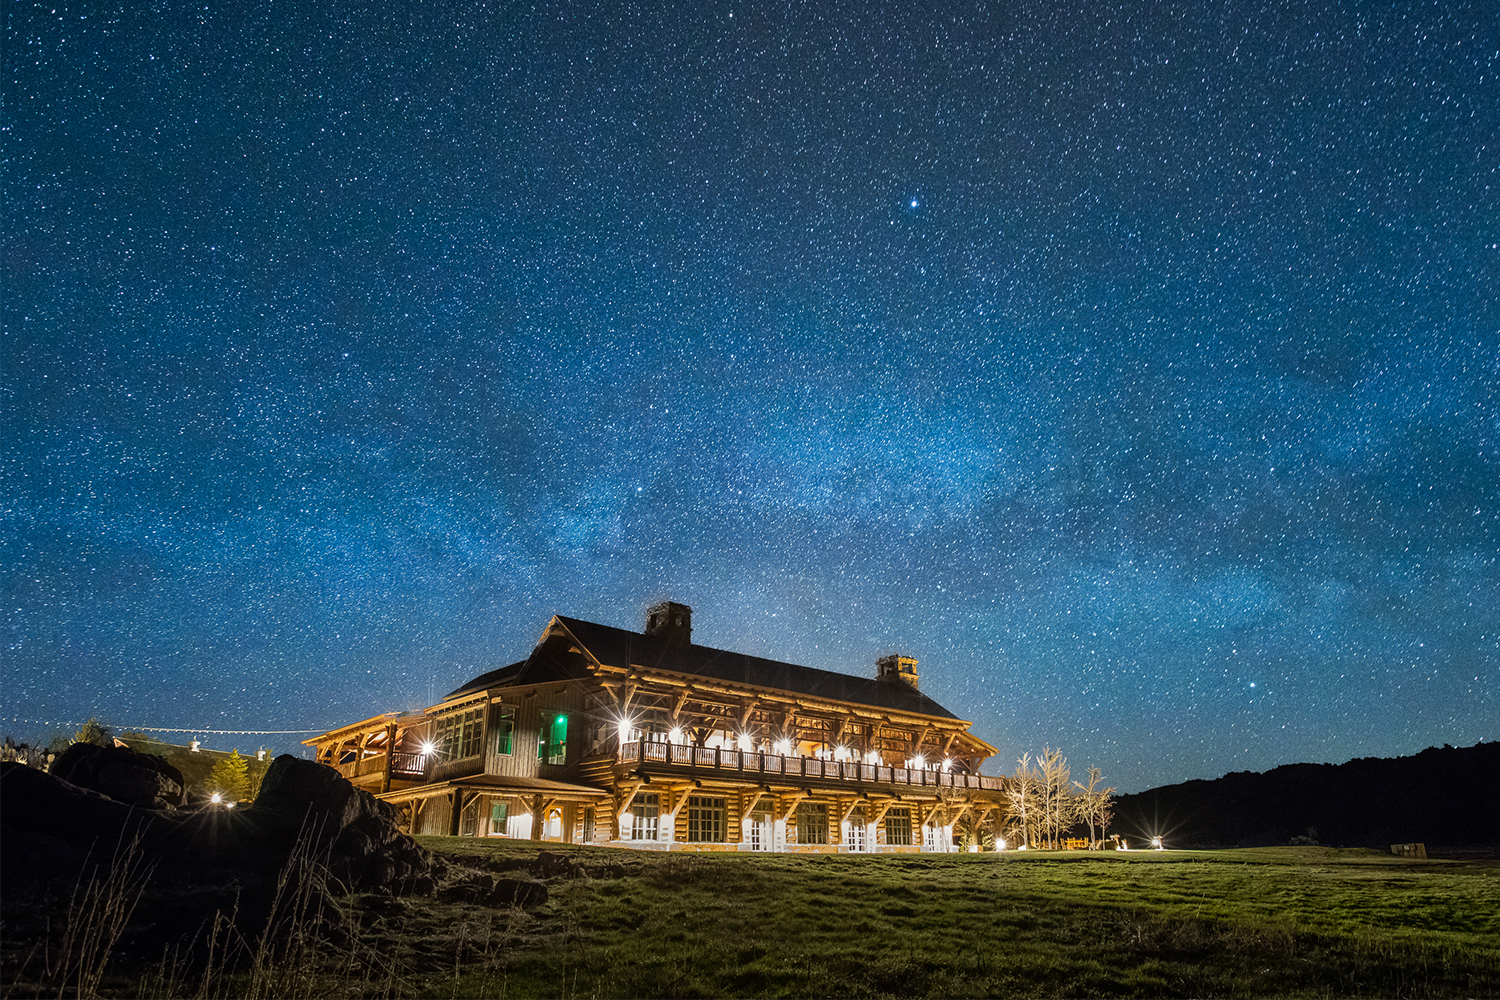 Brush Creek Ranch, one of the best luxury ranch resorts in the U.S., at night with a long exposure highlighting the stars in the sky